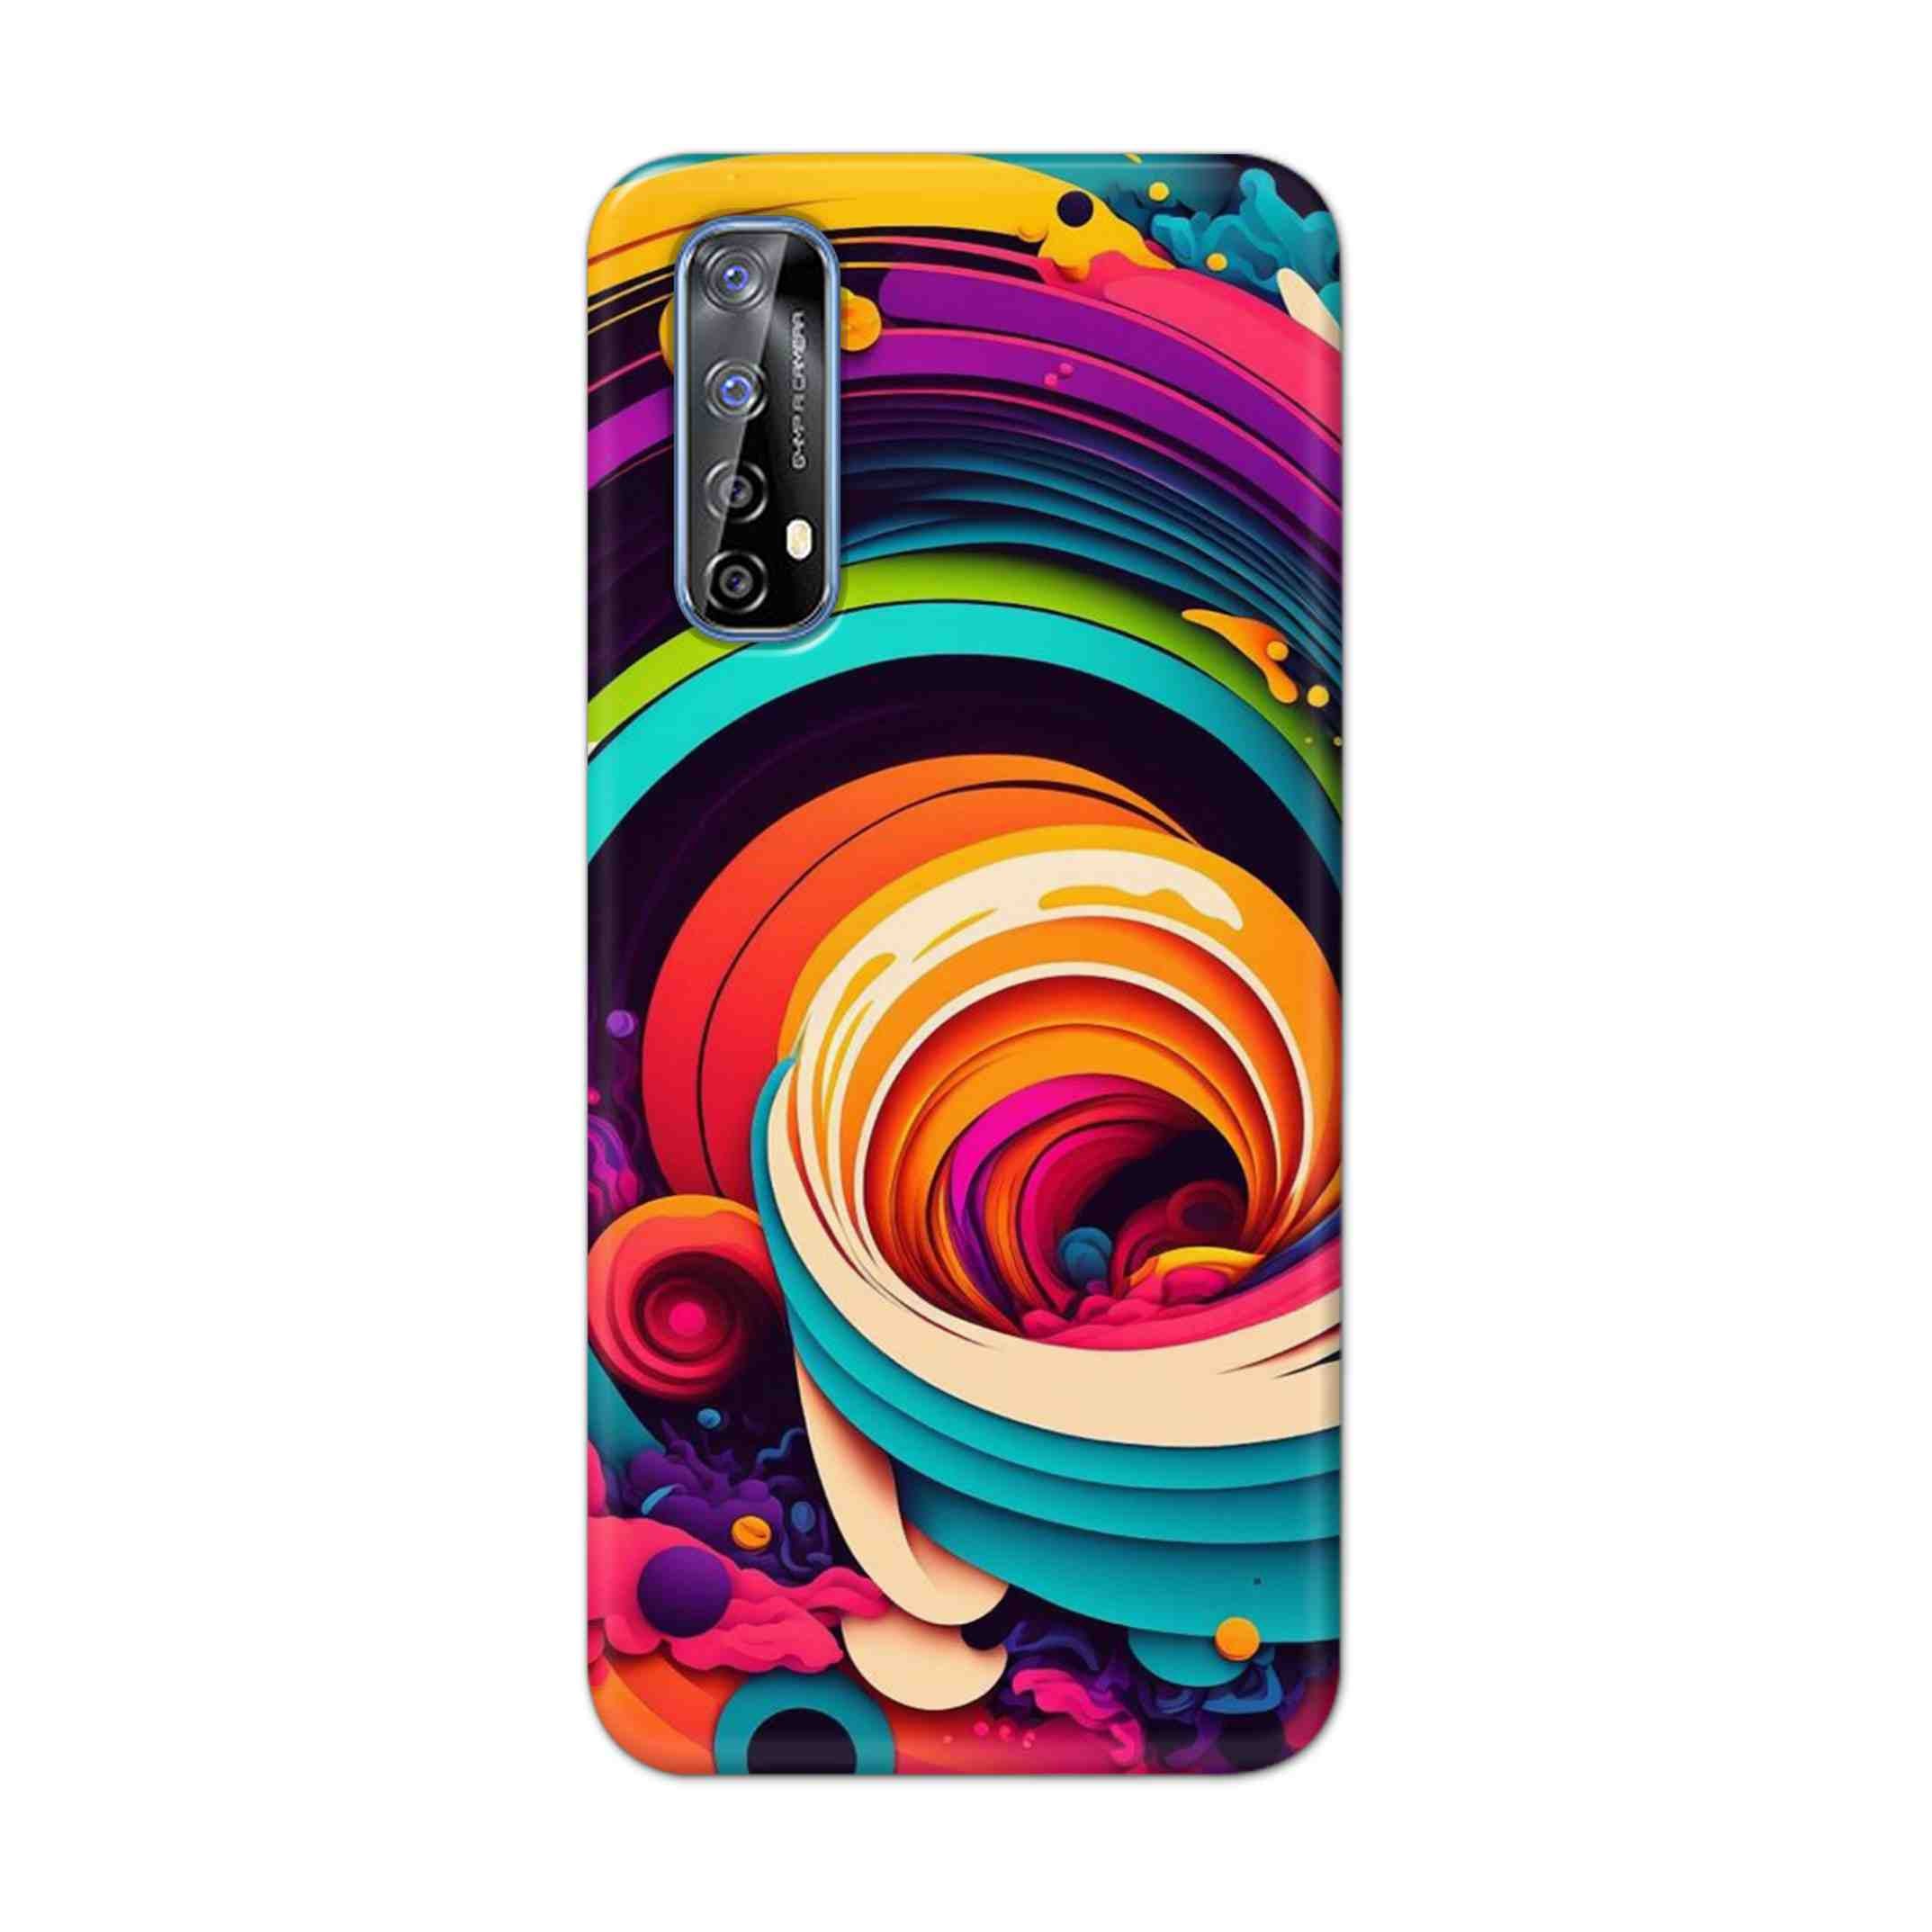 Buy Colour Circle Hard Back Mobile Phone Case Cover For Realme 7 Online